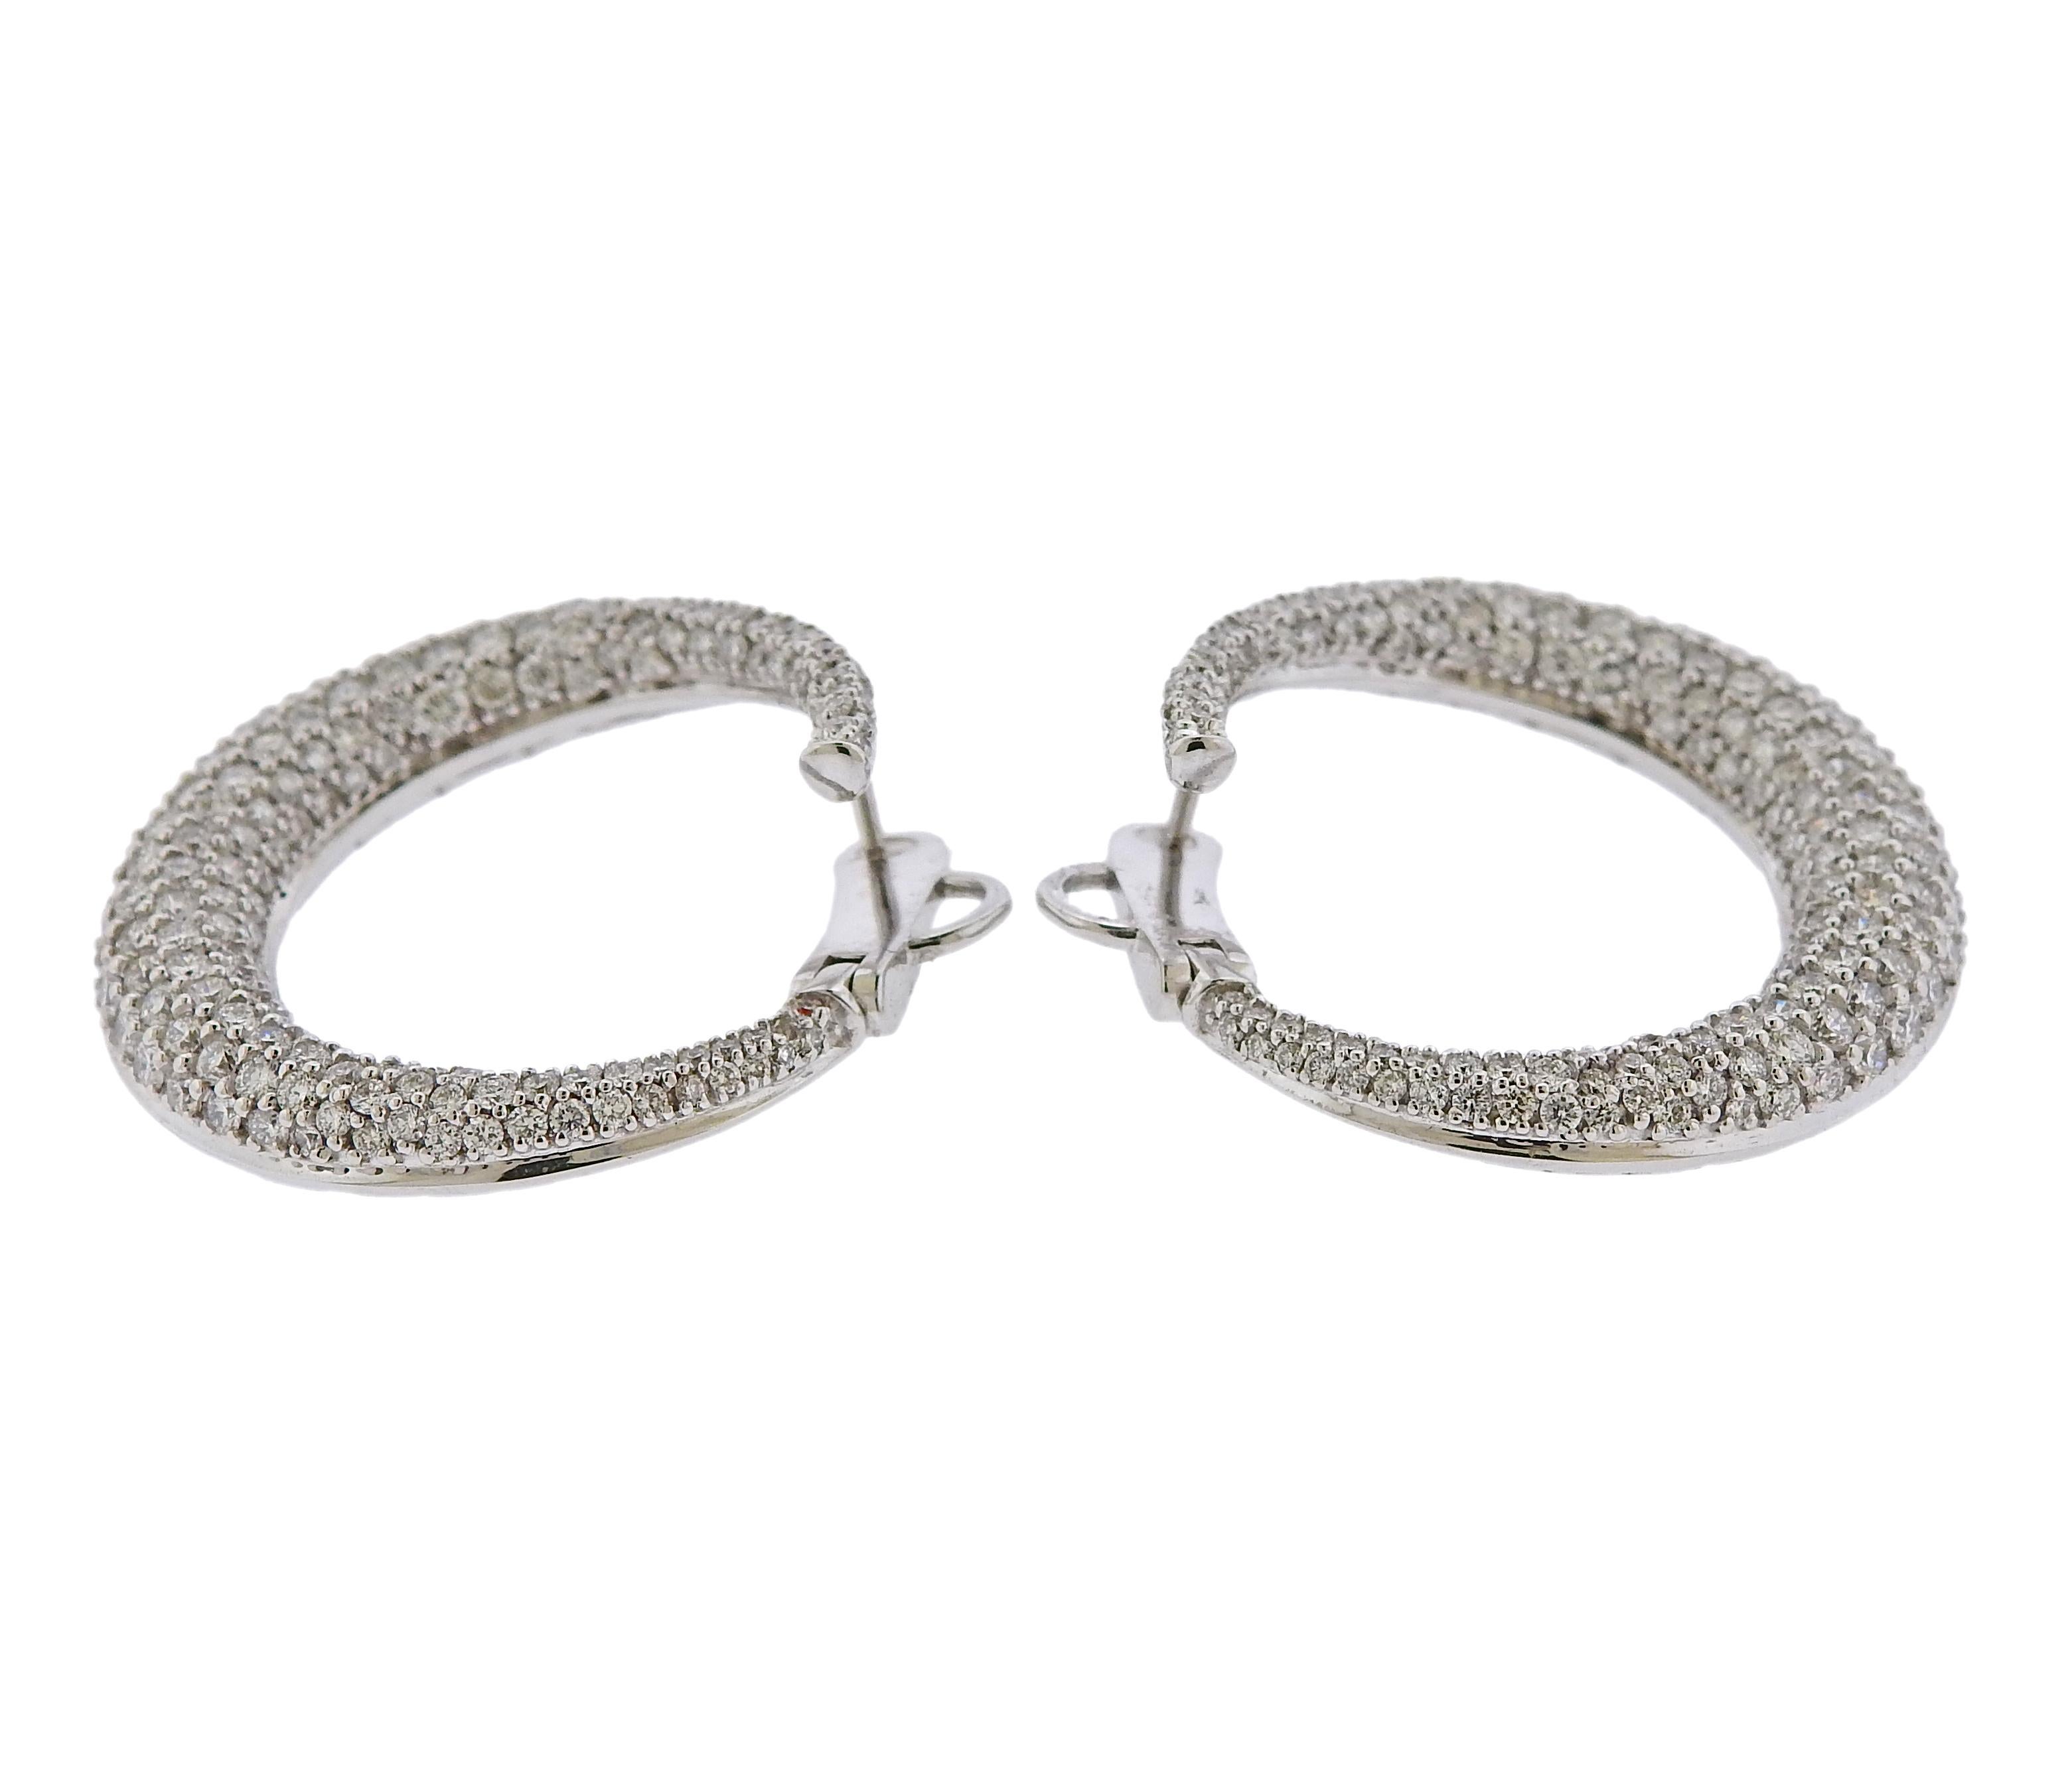 Pair of open circle earrings, set with approx. 3.10ctw in G/VS diamonds. Earrings are 26mm in diameter. Weight is 13 grams. Marked 750, Italian mark.